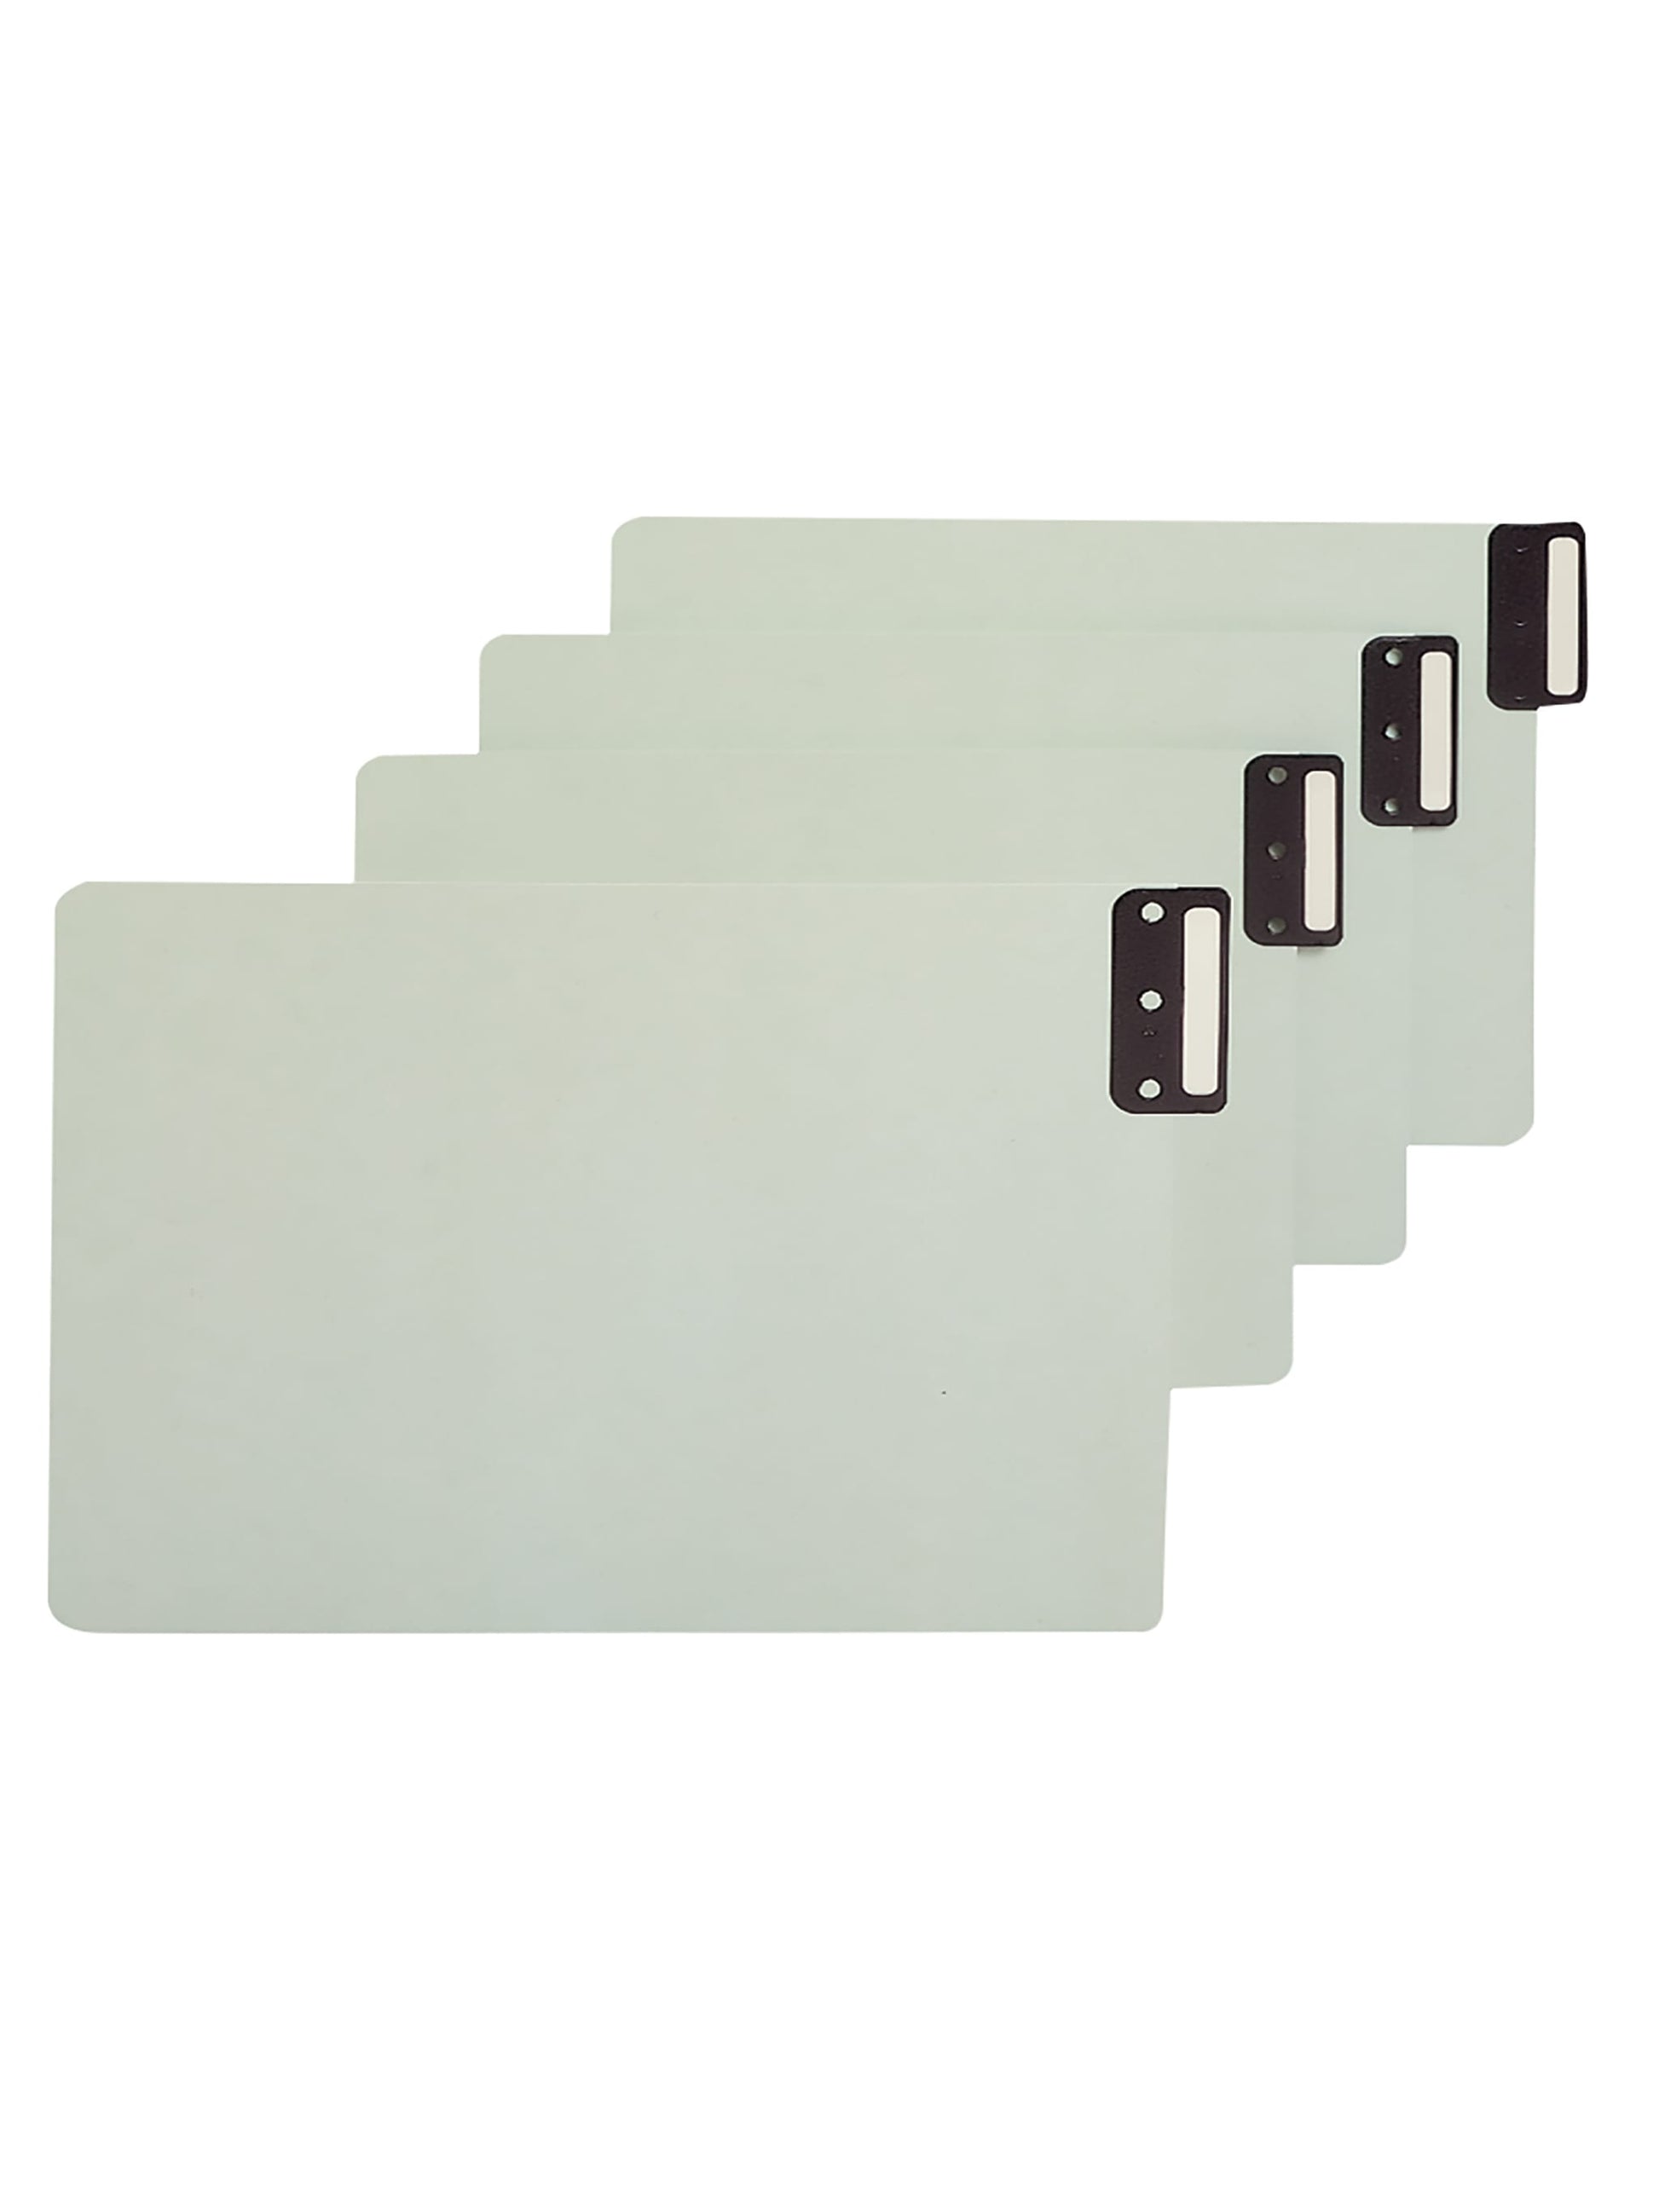 100% Recycled End Tab Pressboard Extra-Wide Filing Guides with Metal Tabs, Gray/Green Color, Extra Wide Legal Size, Set of 50, 086486632355